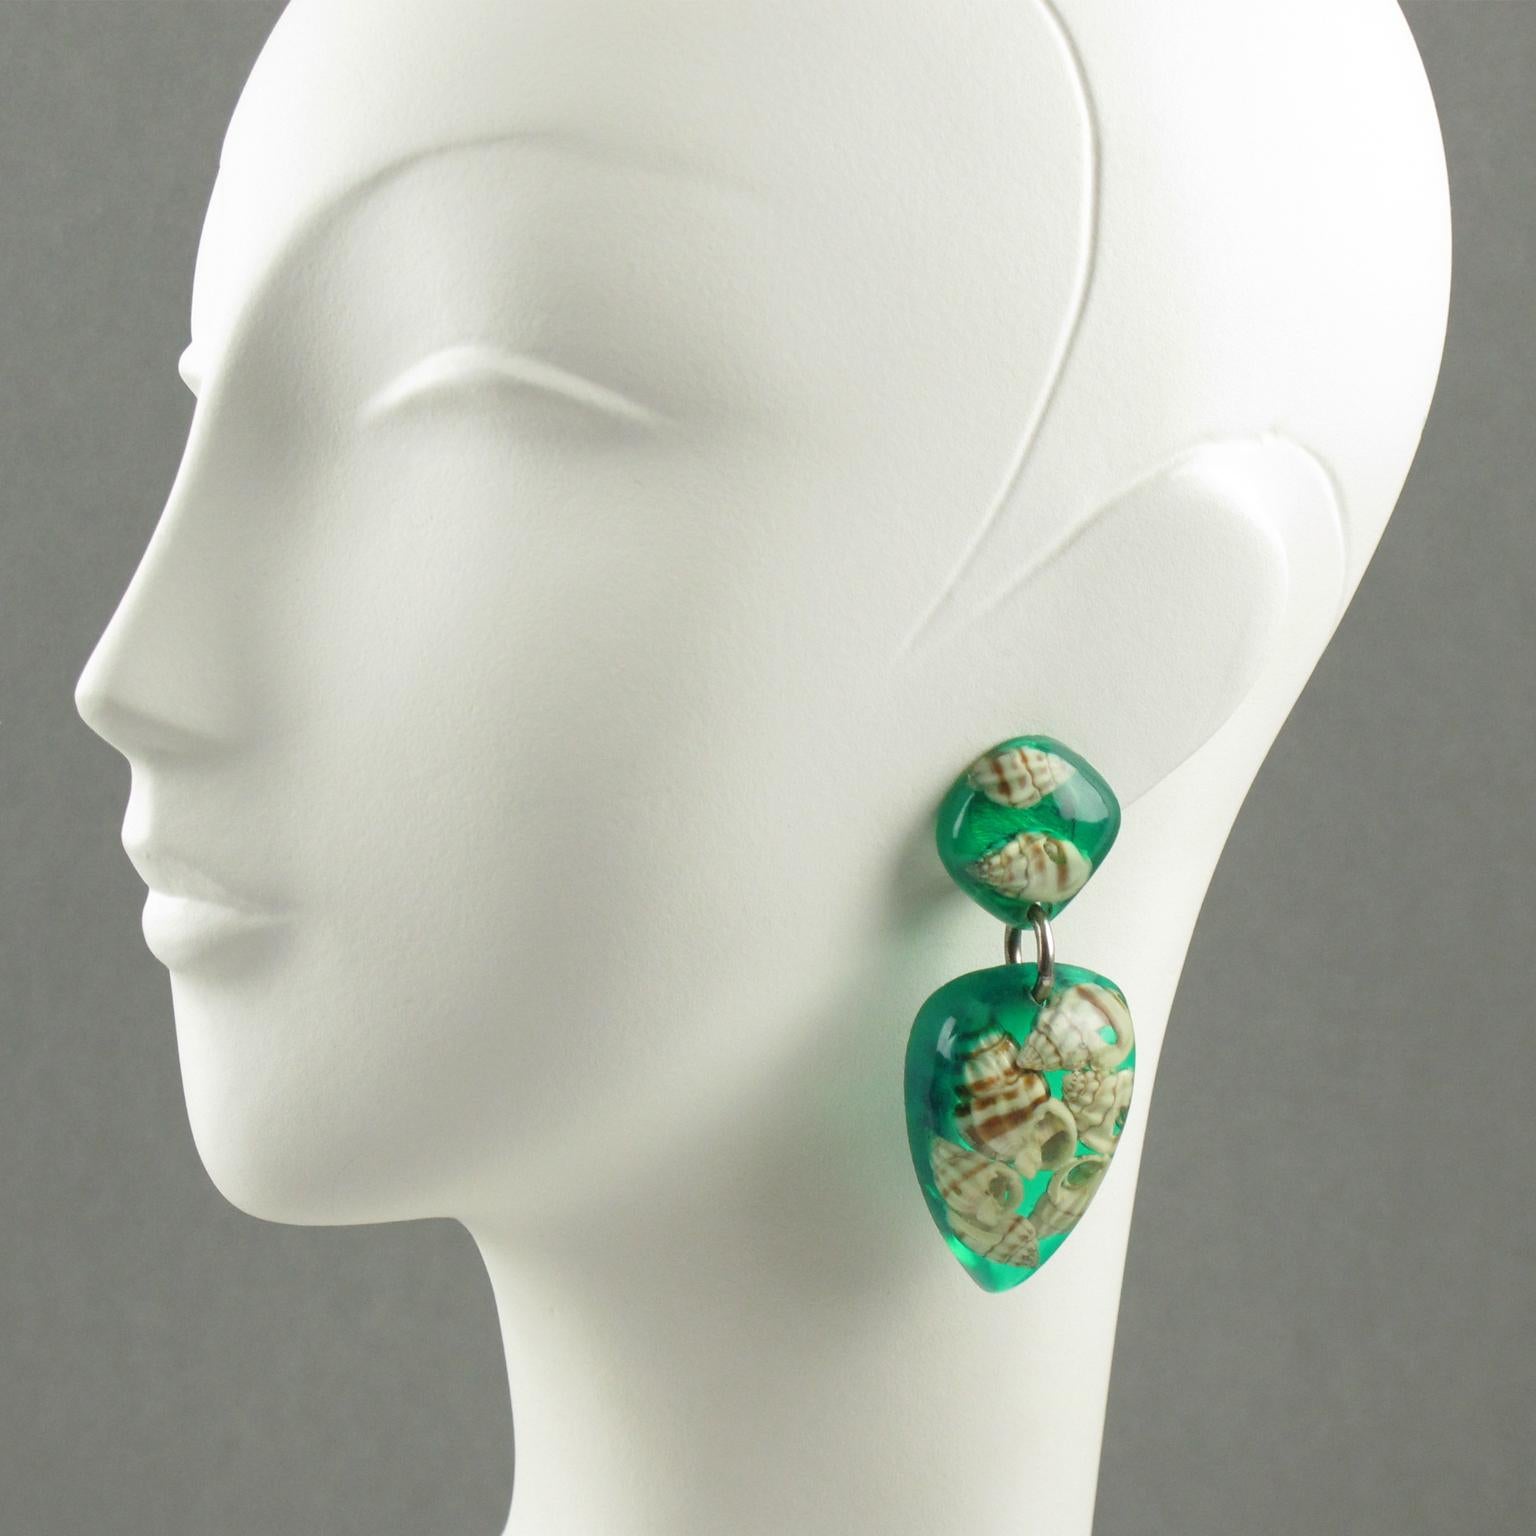 Lovely French oversized Lucite clip on earrings. Elegant long dangling shape with transparent aqua green Lucite and real sea shell inclusions. 
Measurements: 2.82 in. long (7.2 cm) x 1.13 in. wide (2.9 cm)